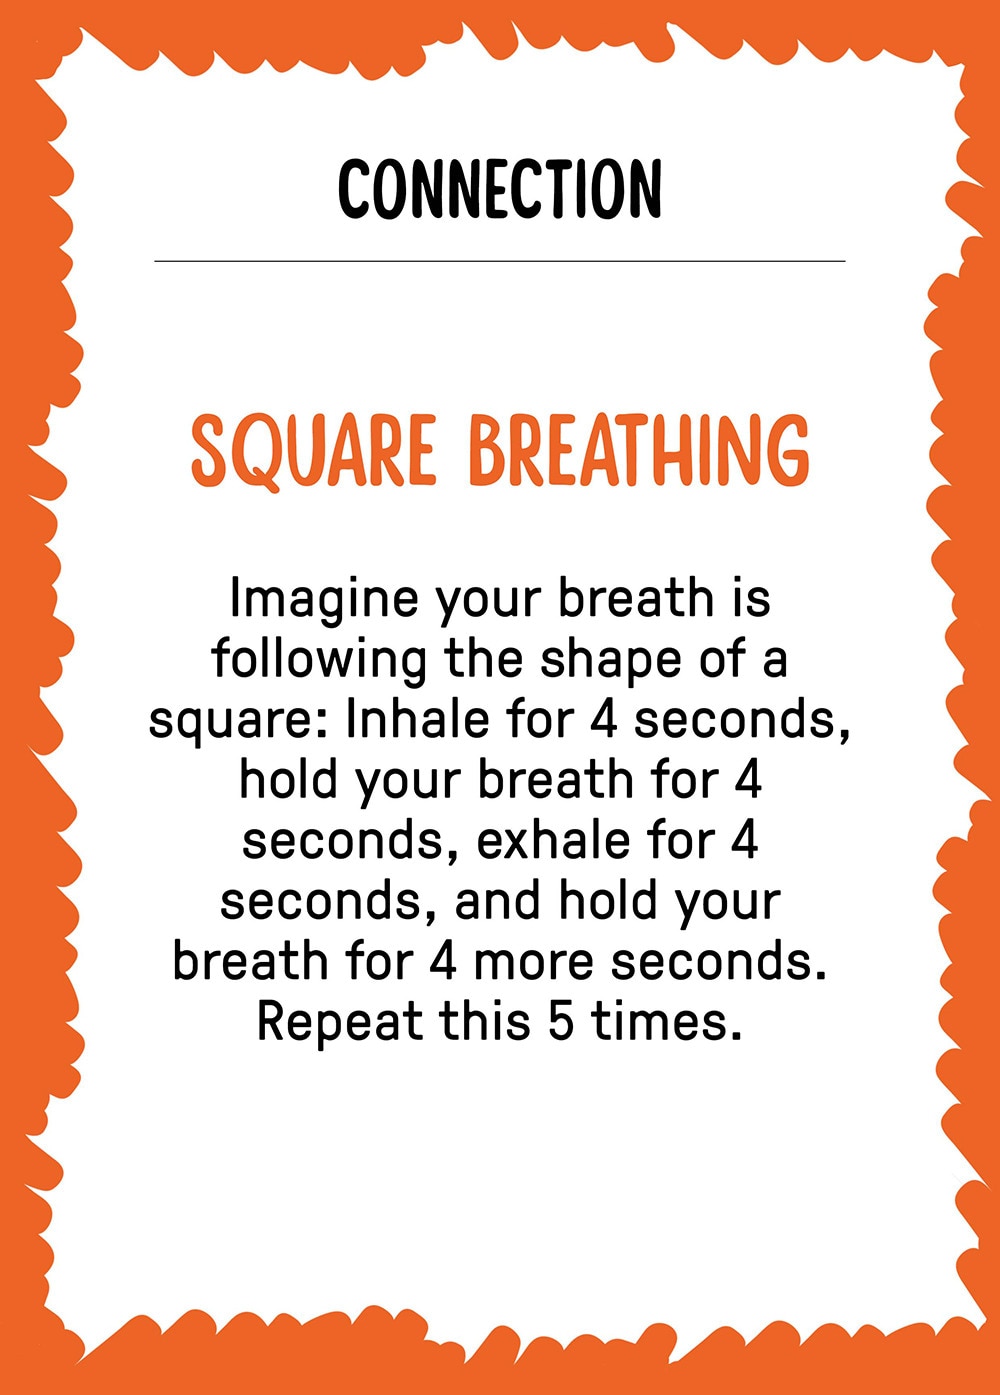 Back of the card showing the square breathing activity instructions. Imagine your breath is following the shape of a square: inhale 4 seconds, old your breath for 4 second, repeat 5 times